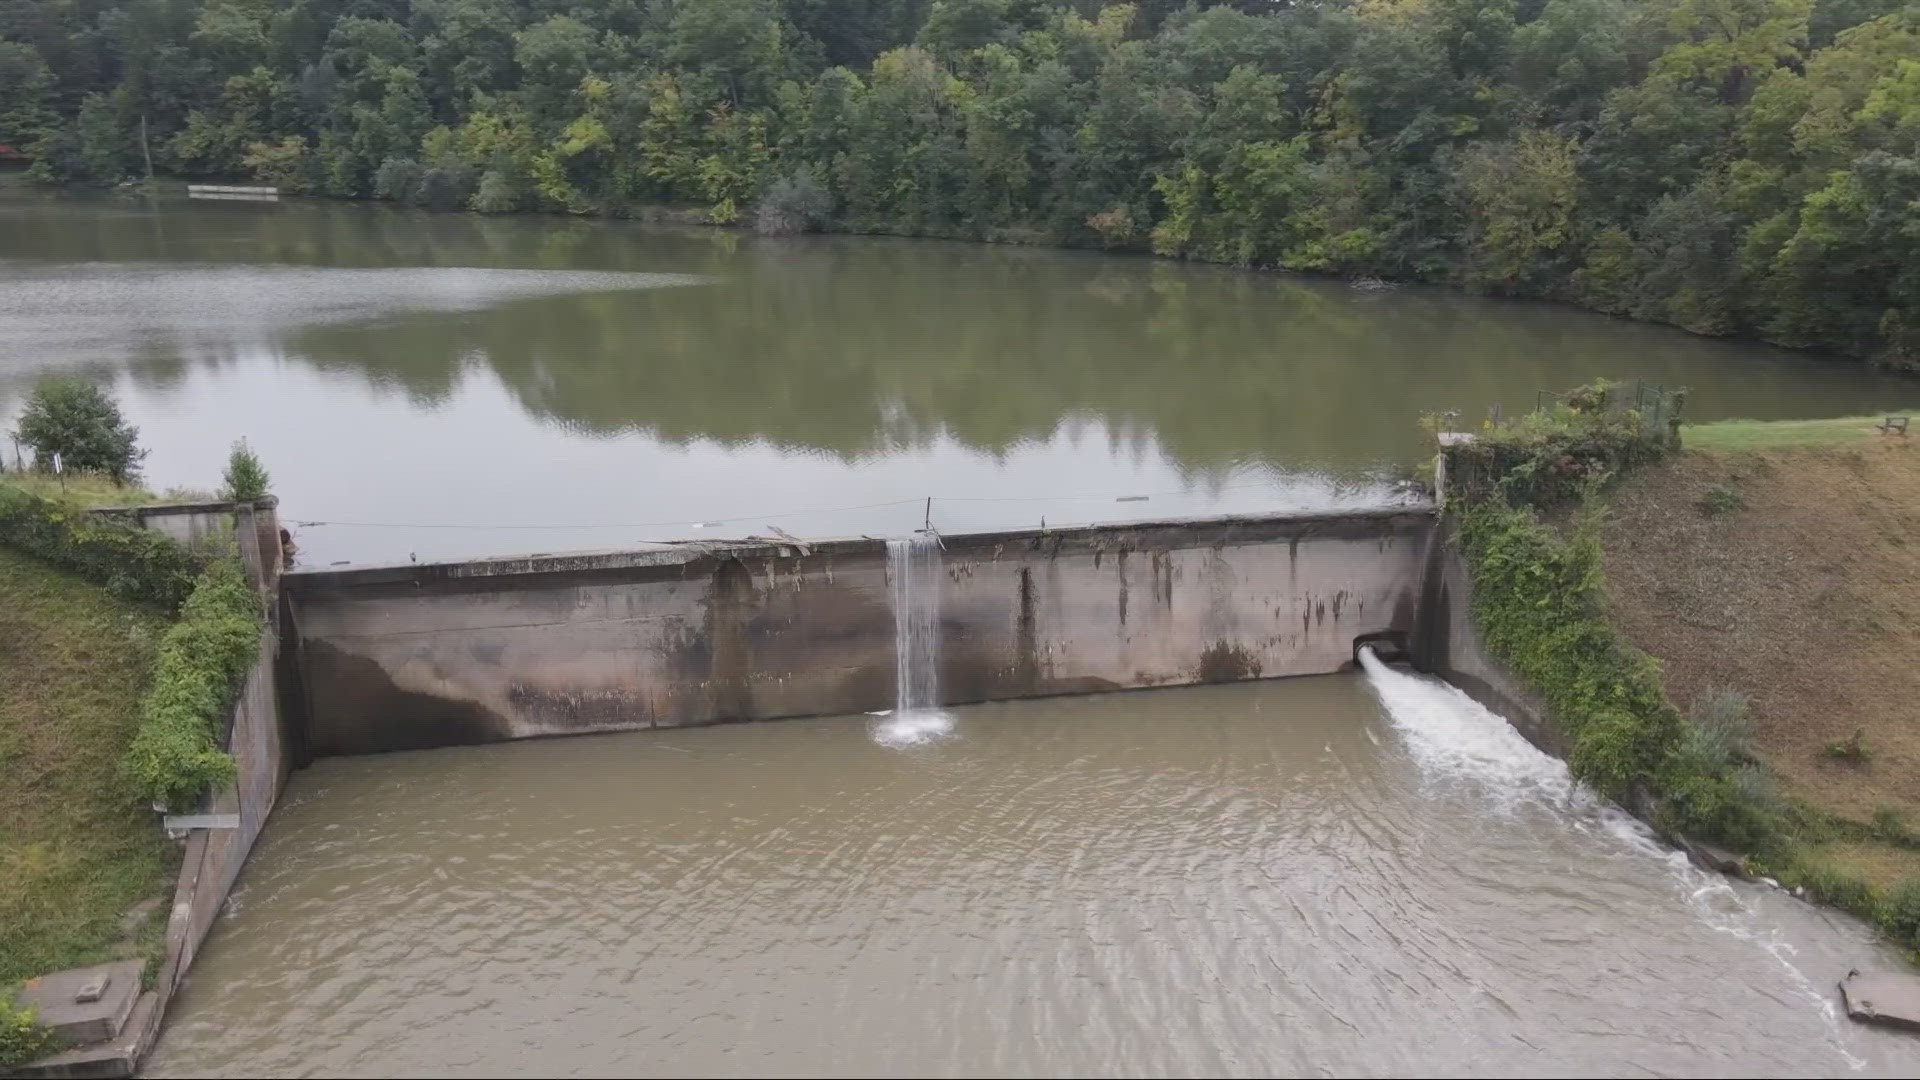 The dam rehabilitation is expected to cost approximately $9-10 million.